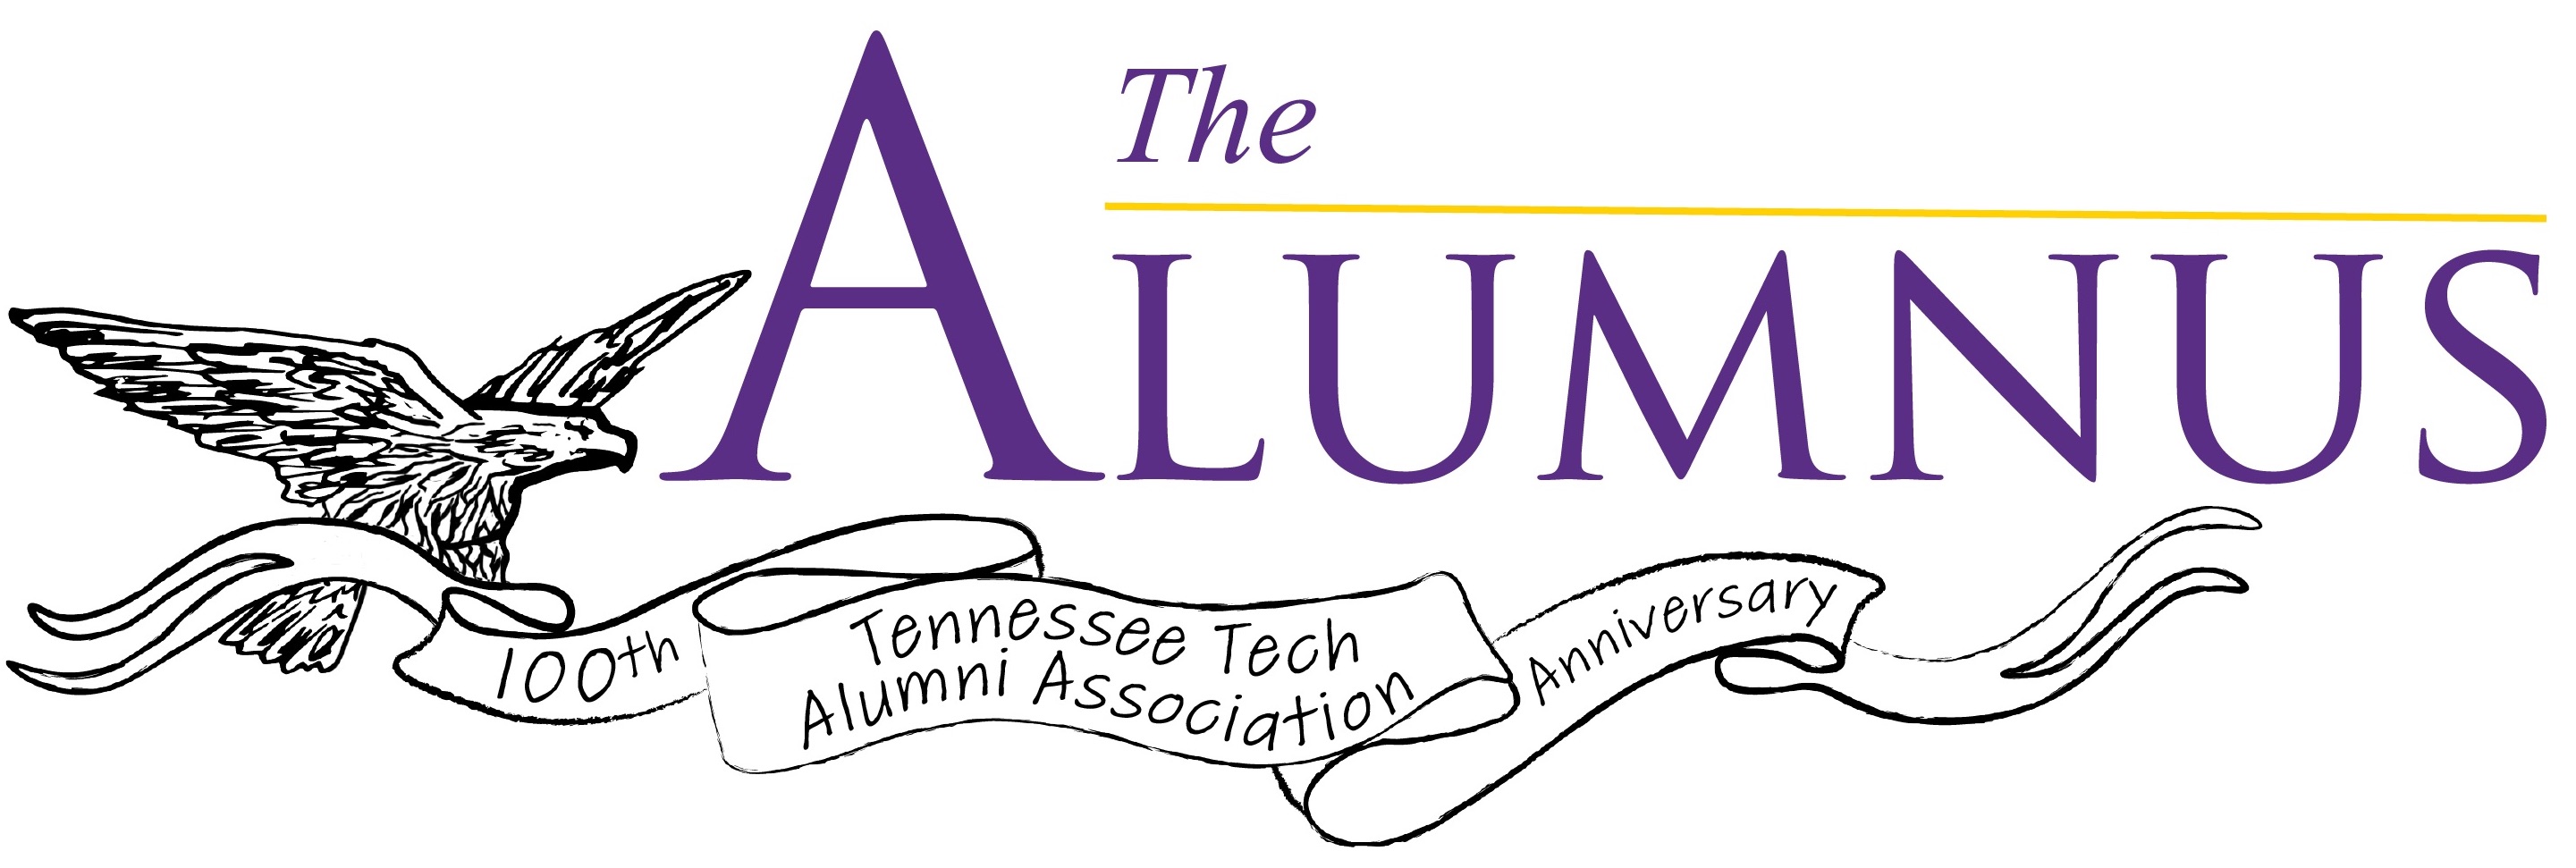 The Alumnus logo with a sketched eagle and a banner underneath reading "100th Anniversary Tennessee Tech Alumni Association"